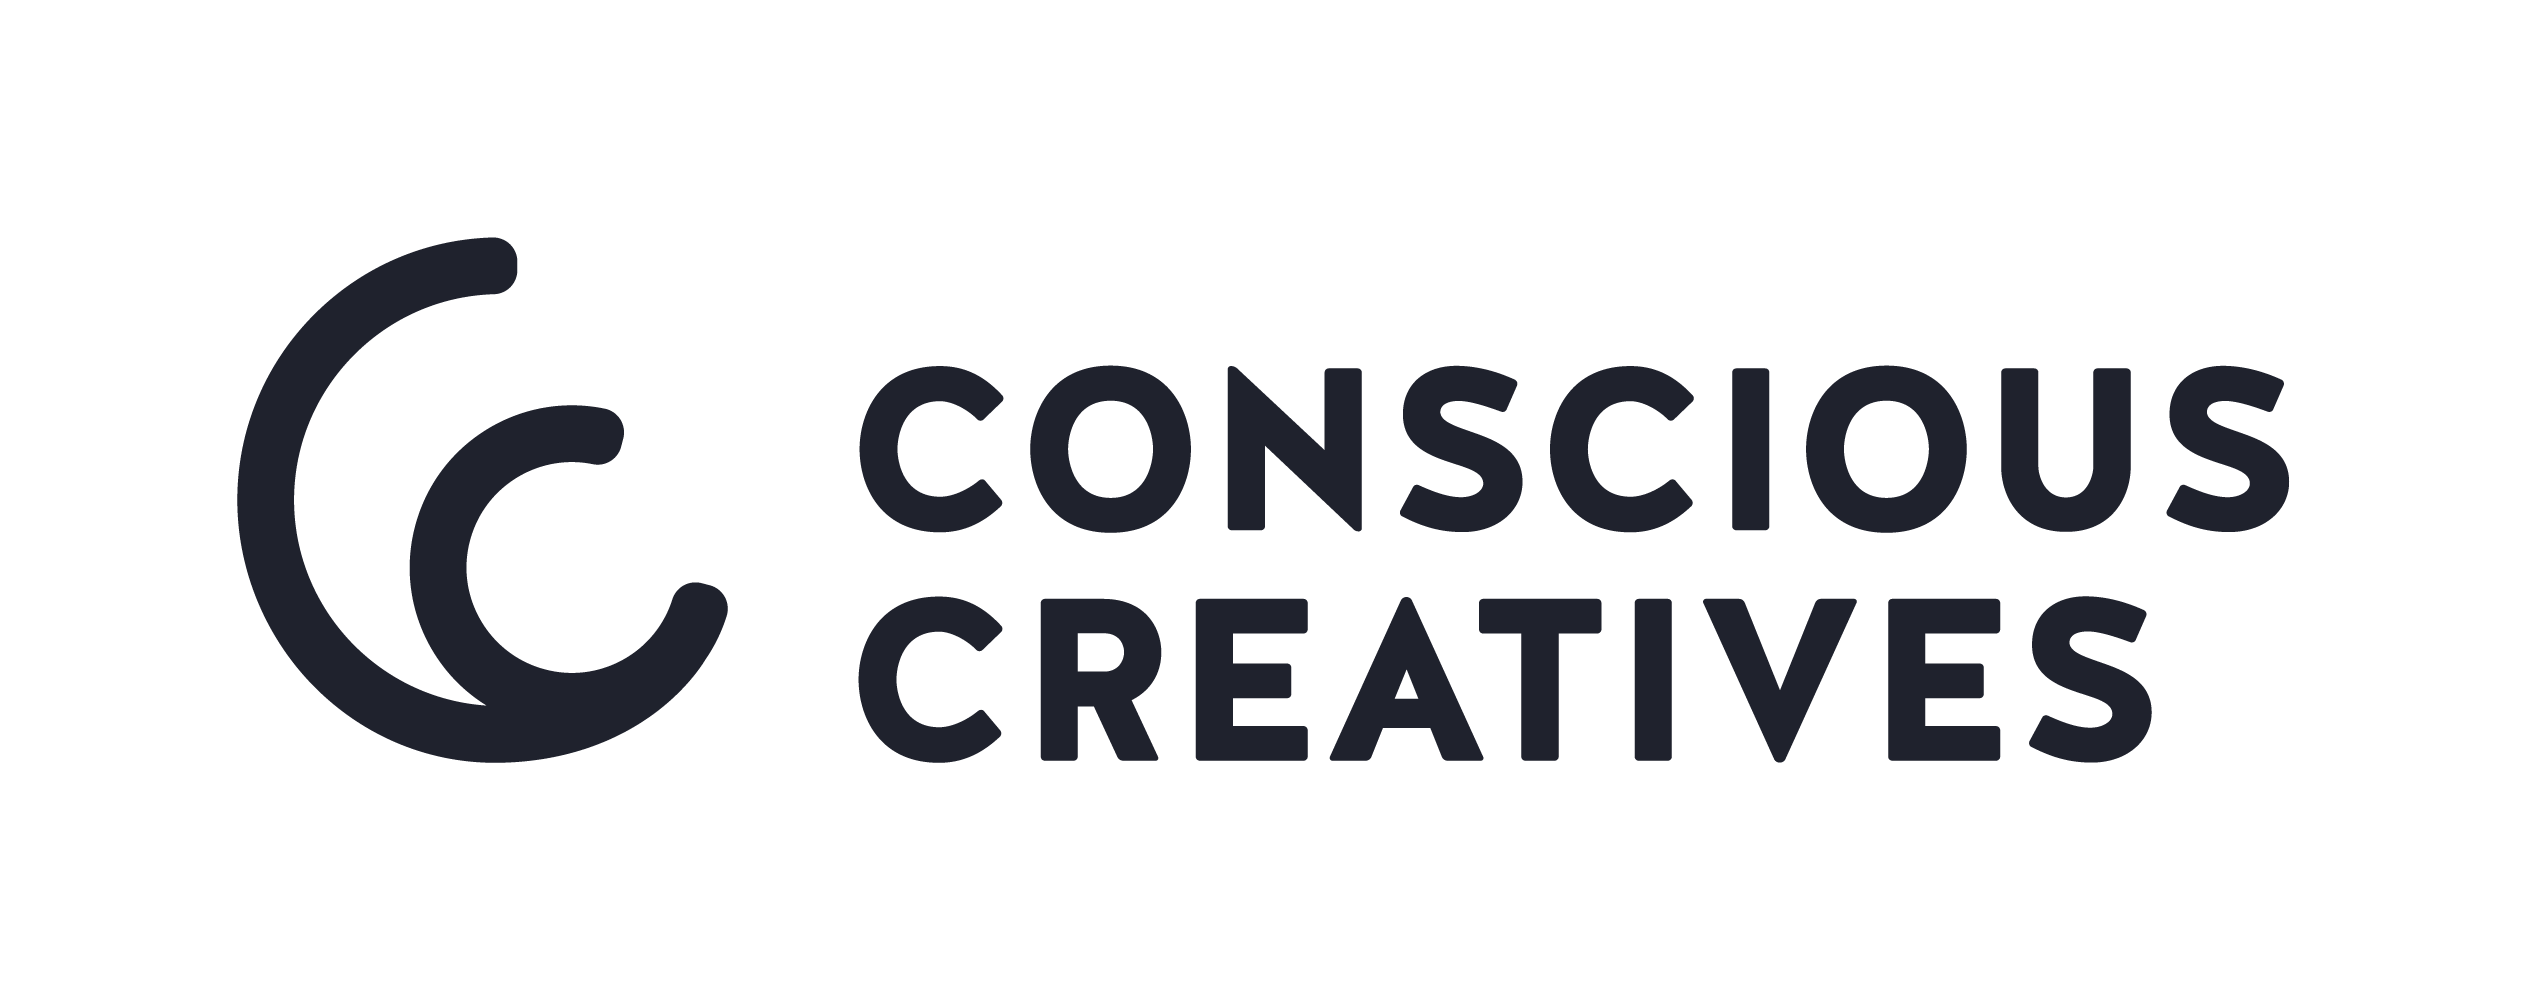 Conscious Creatives Sustainable Marketing & Impact Communications Agency Based in Cornwall